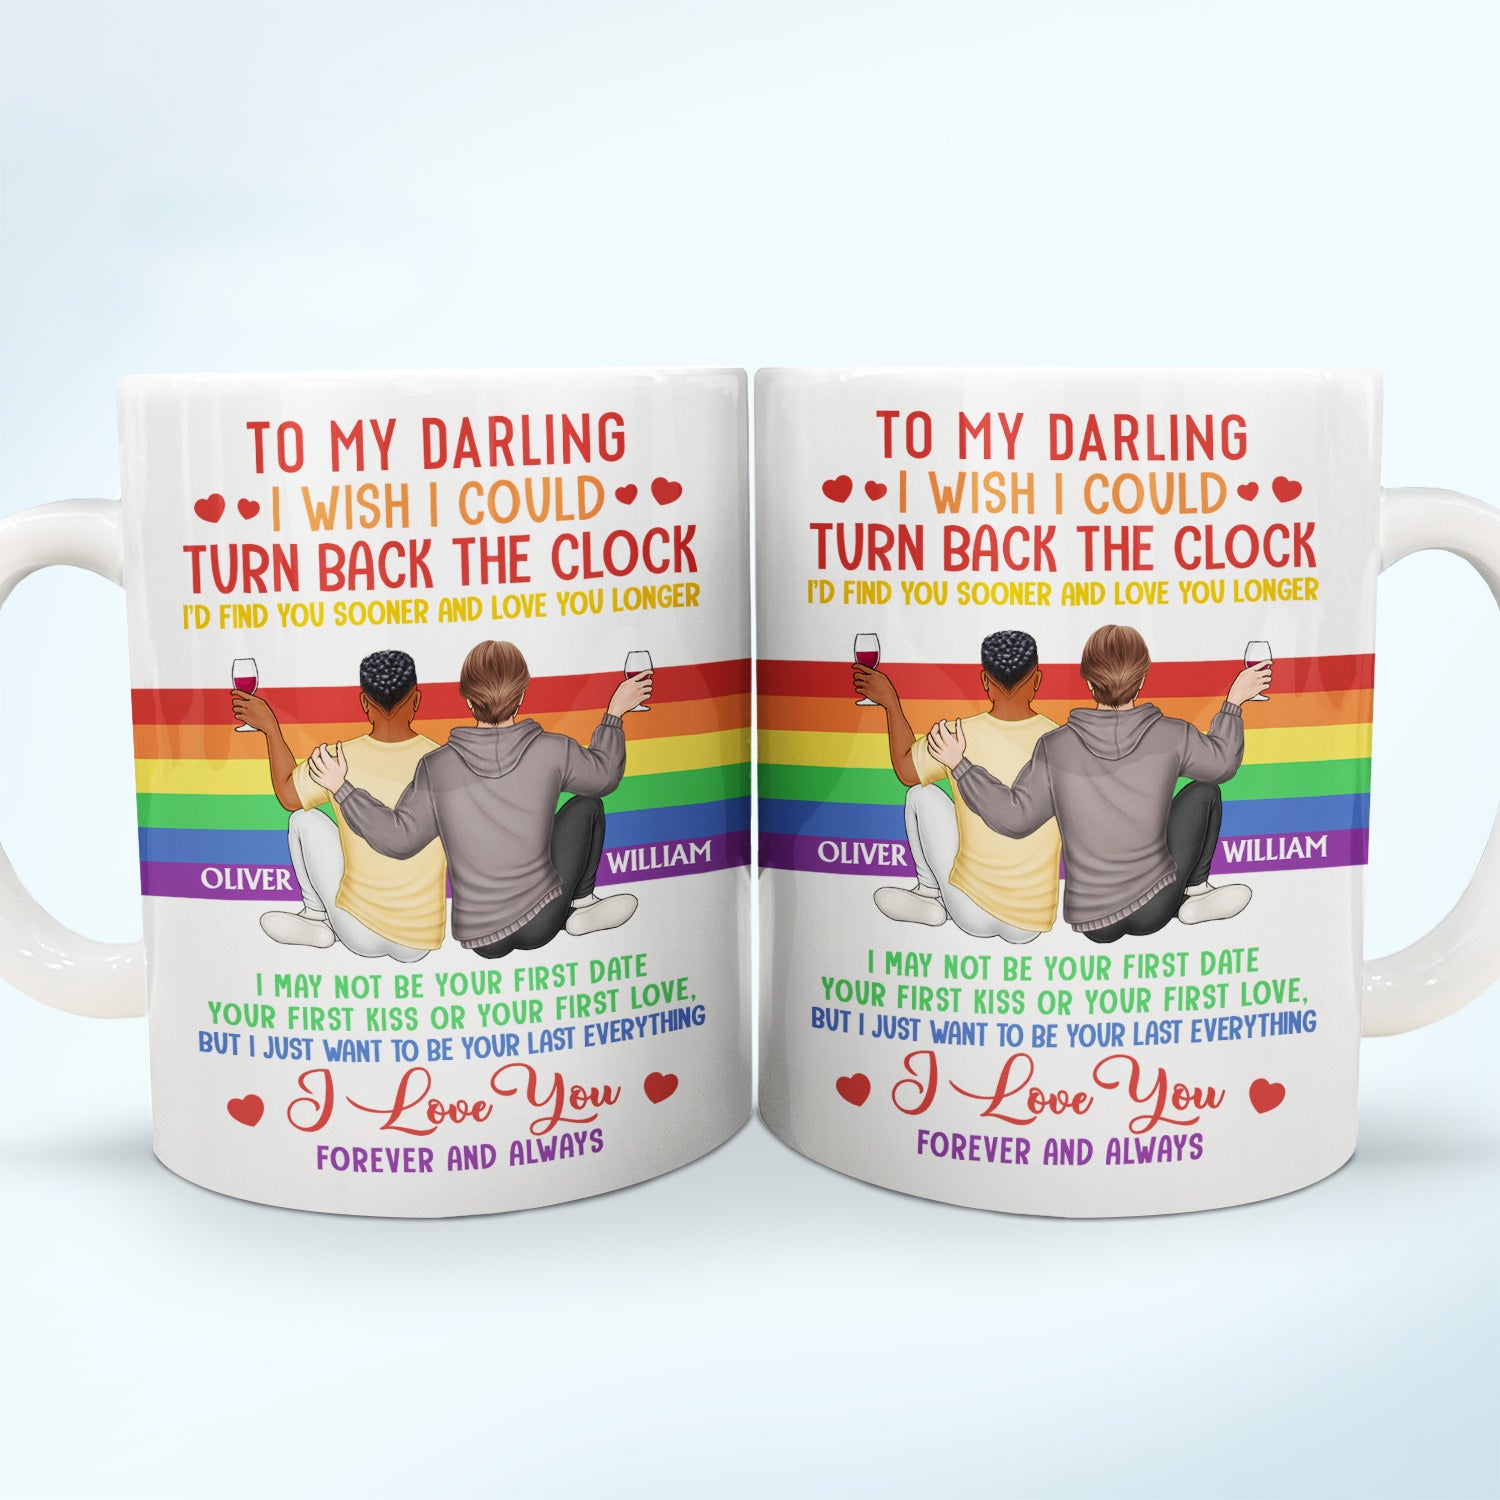 I Wish I Could Turn Back The Clock - Anniversary, Loving Gift For Pride Couples, Husband, Wife - Personalized White Edge-to-Edge Mug